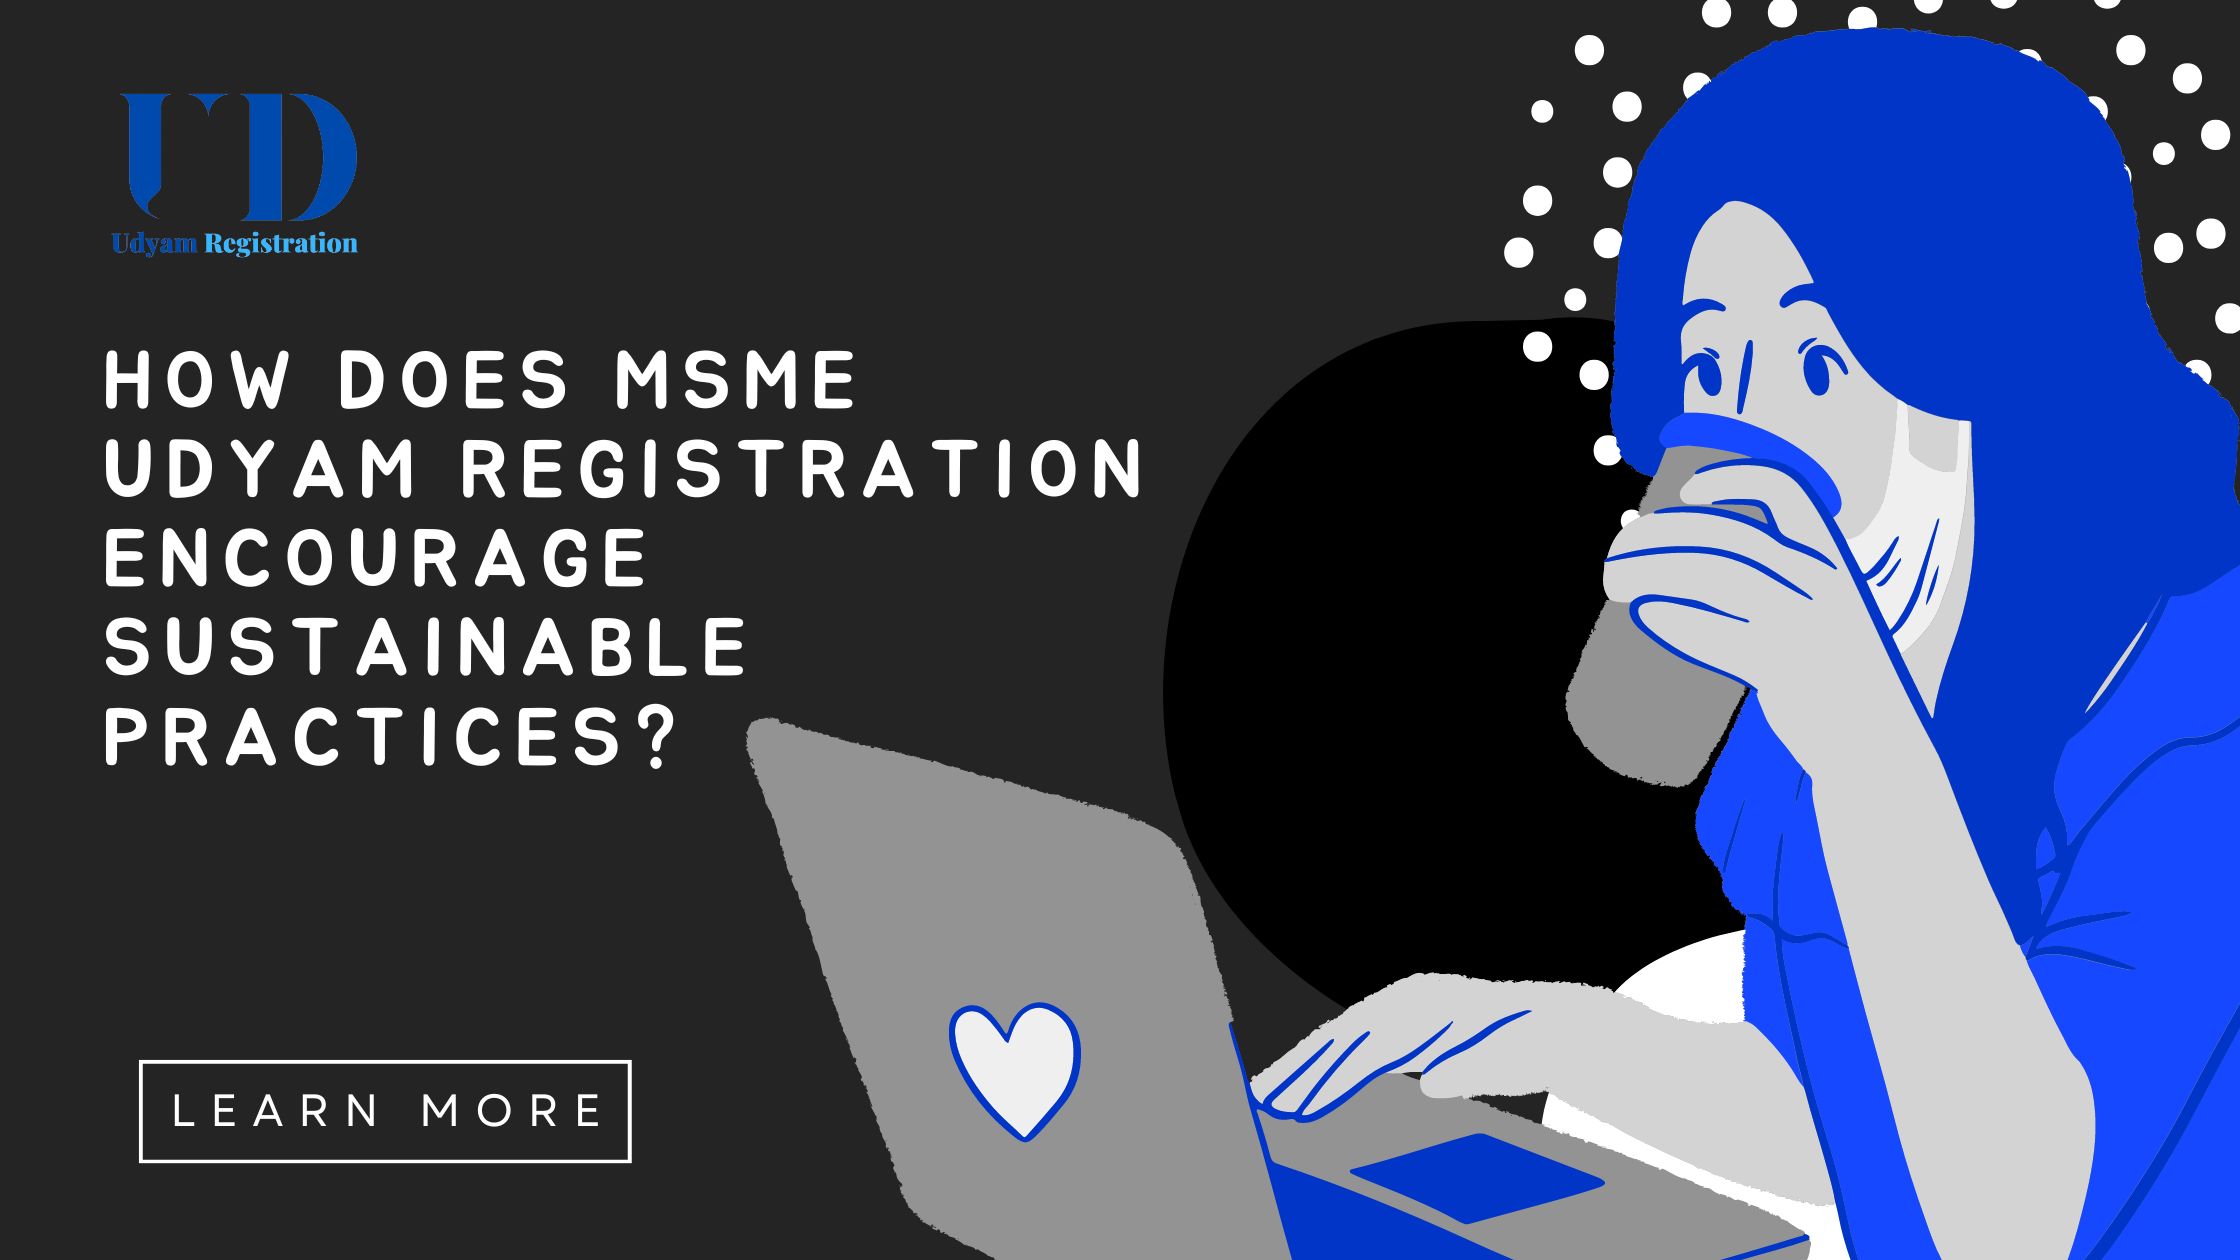 How does MSME Udyam registration encourage sustainable practices?